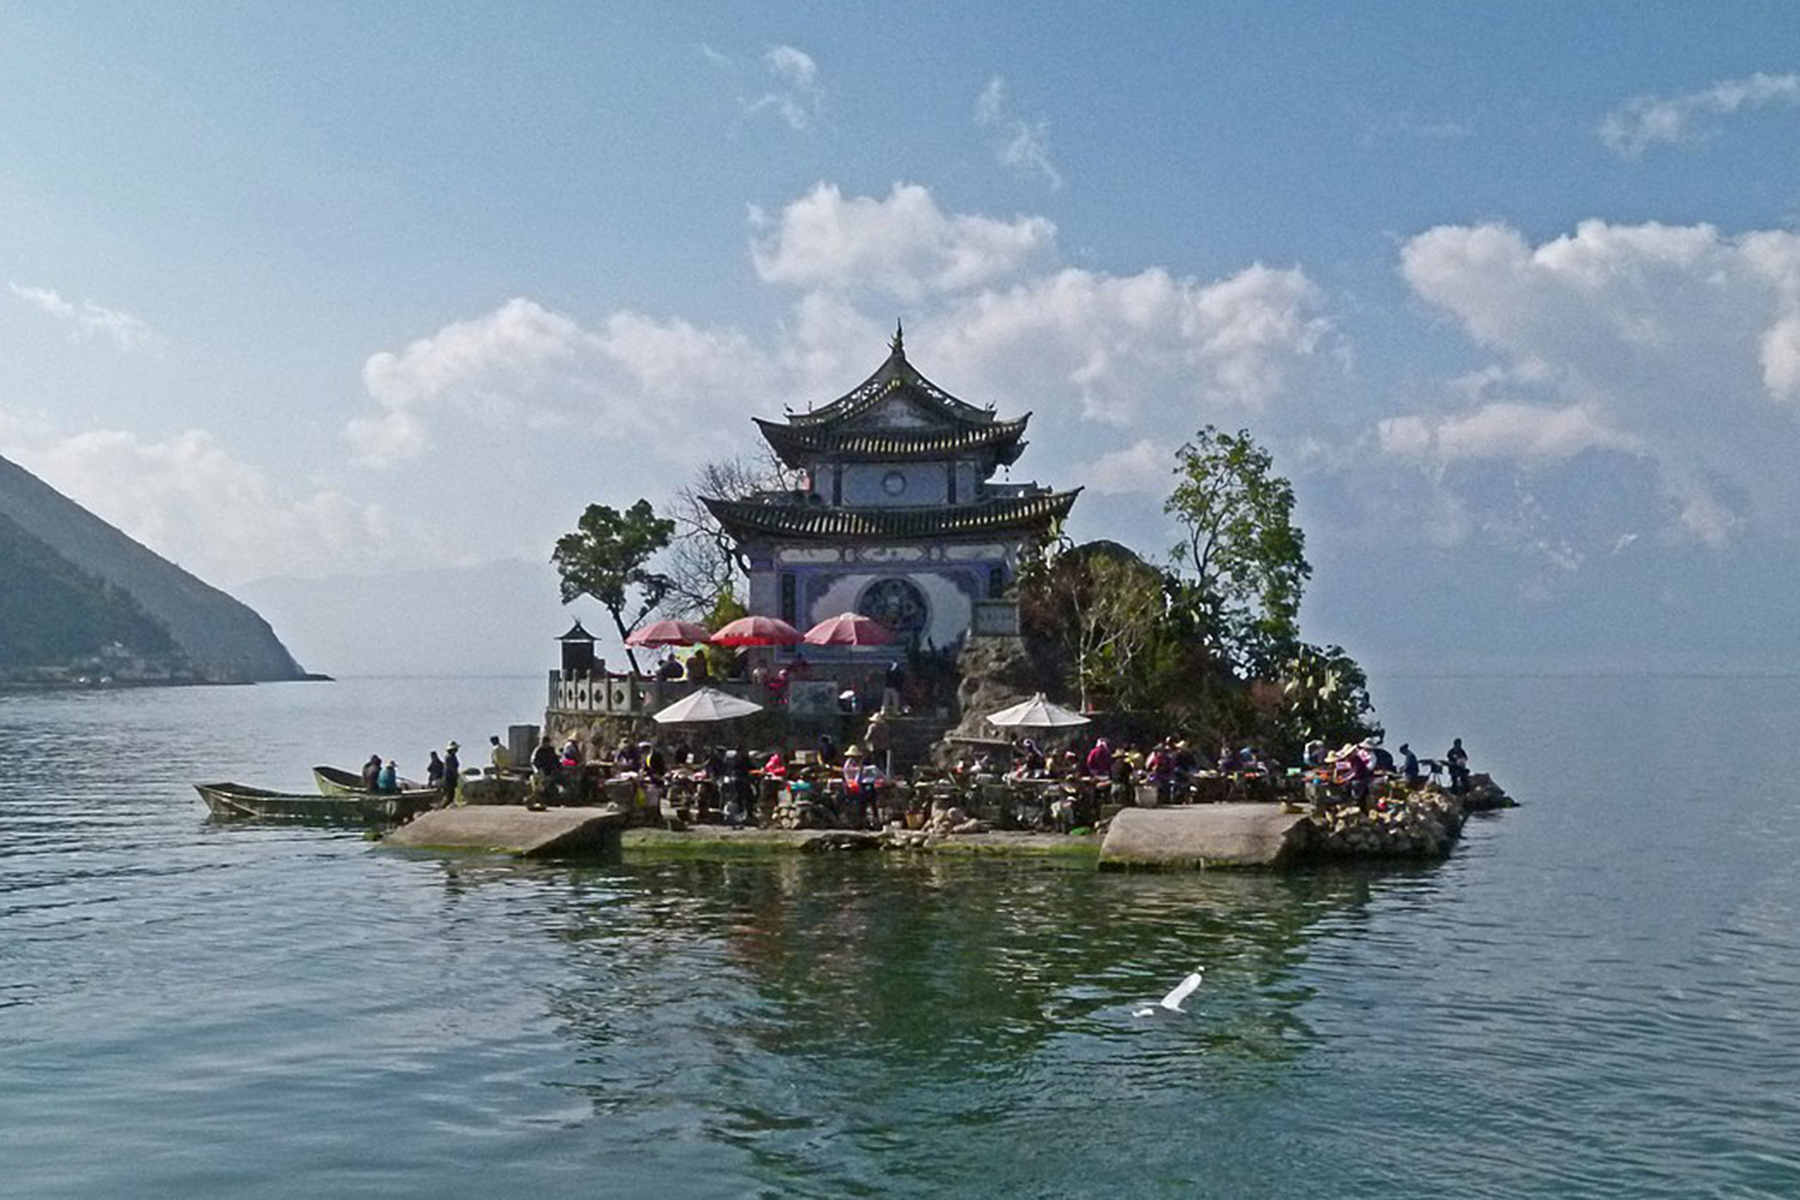 Temple on a small island in Erhai Lake, Yunnan Province, China